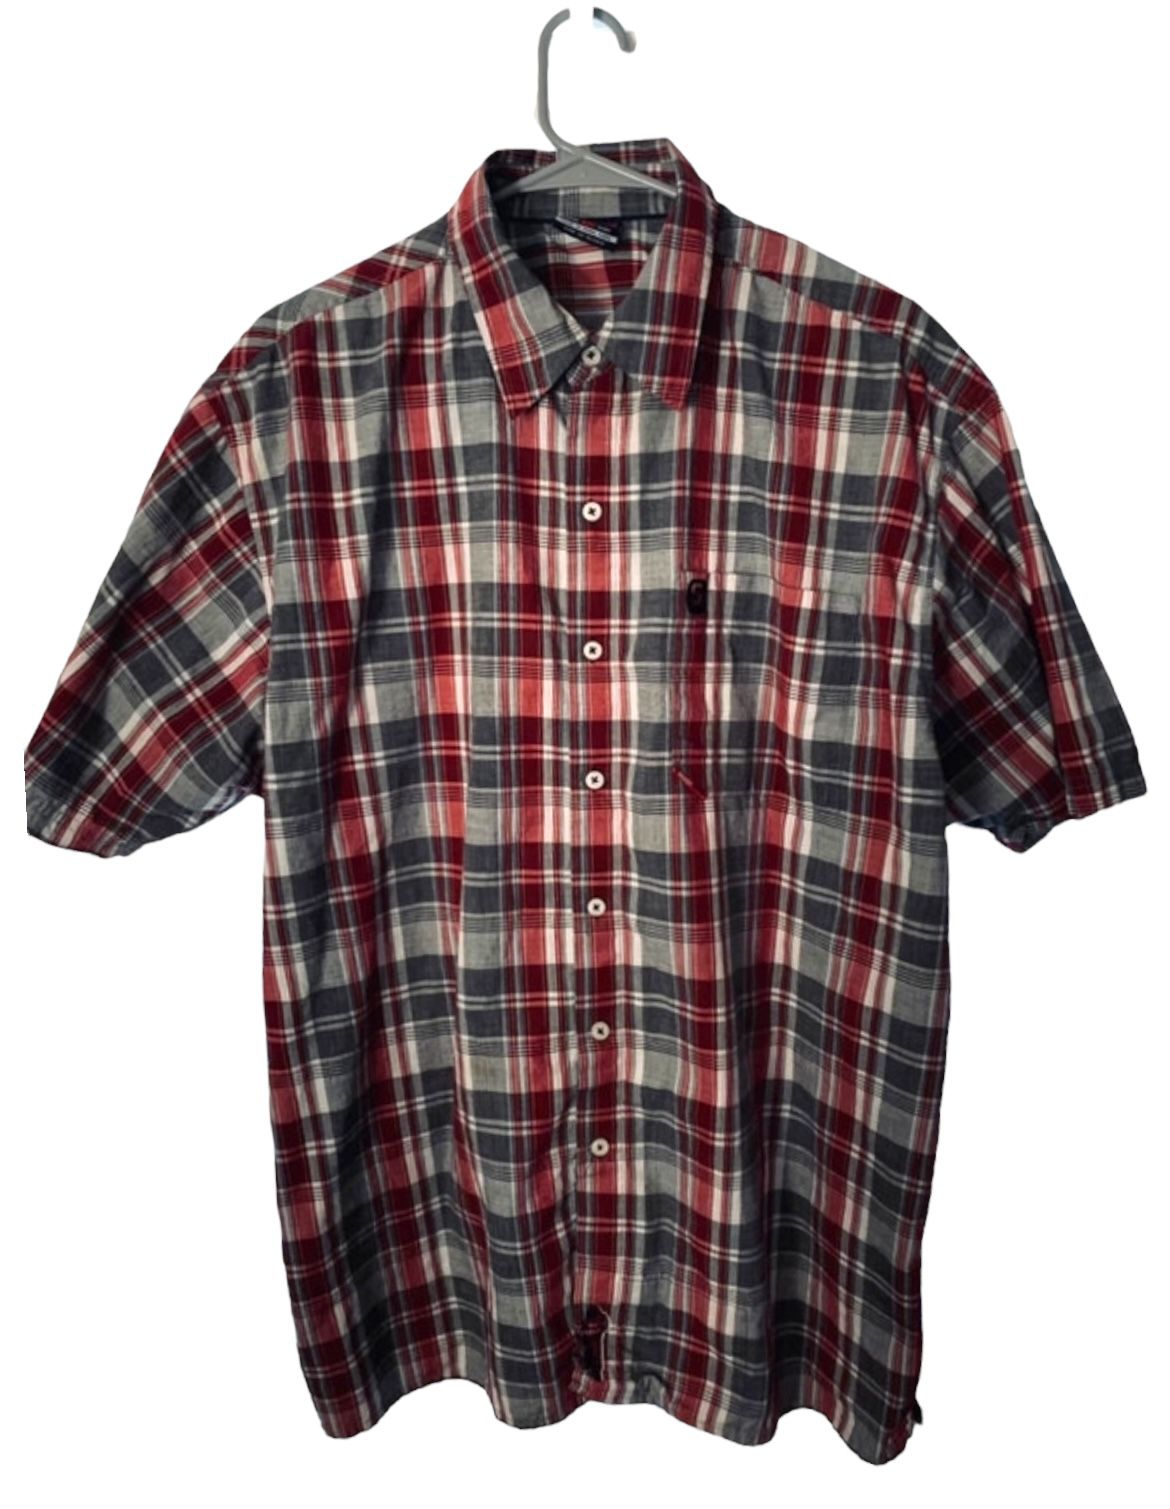 Shady LTD Button Down Plaid Shirt Red and Gray Short Sleeve Size Large